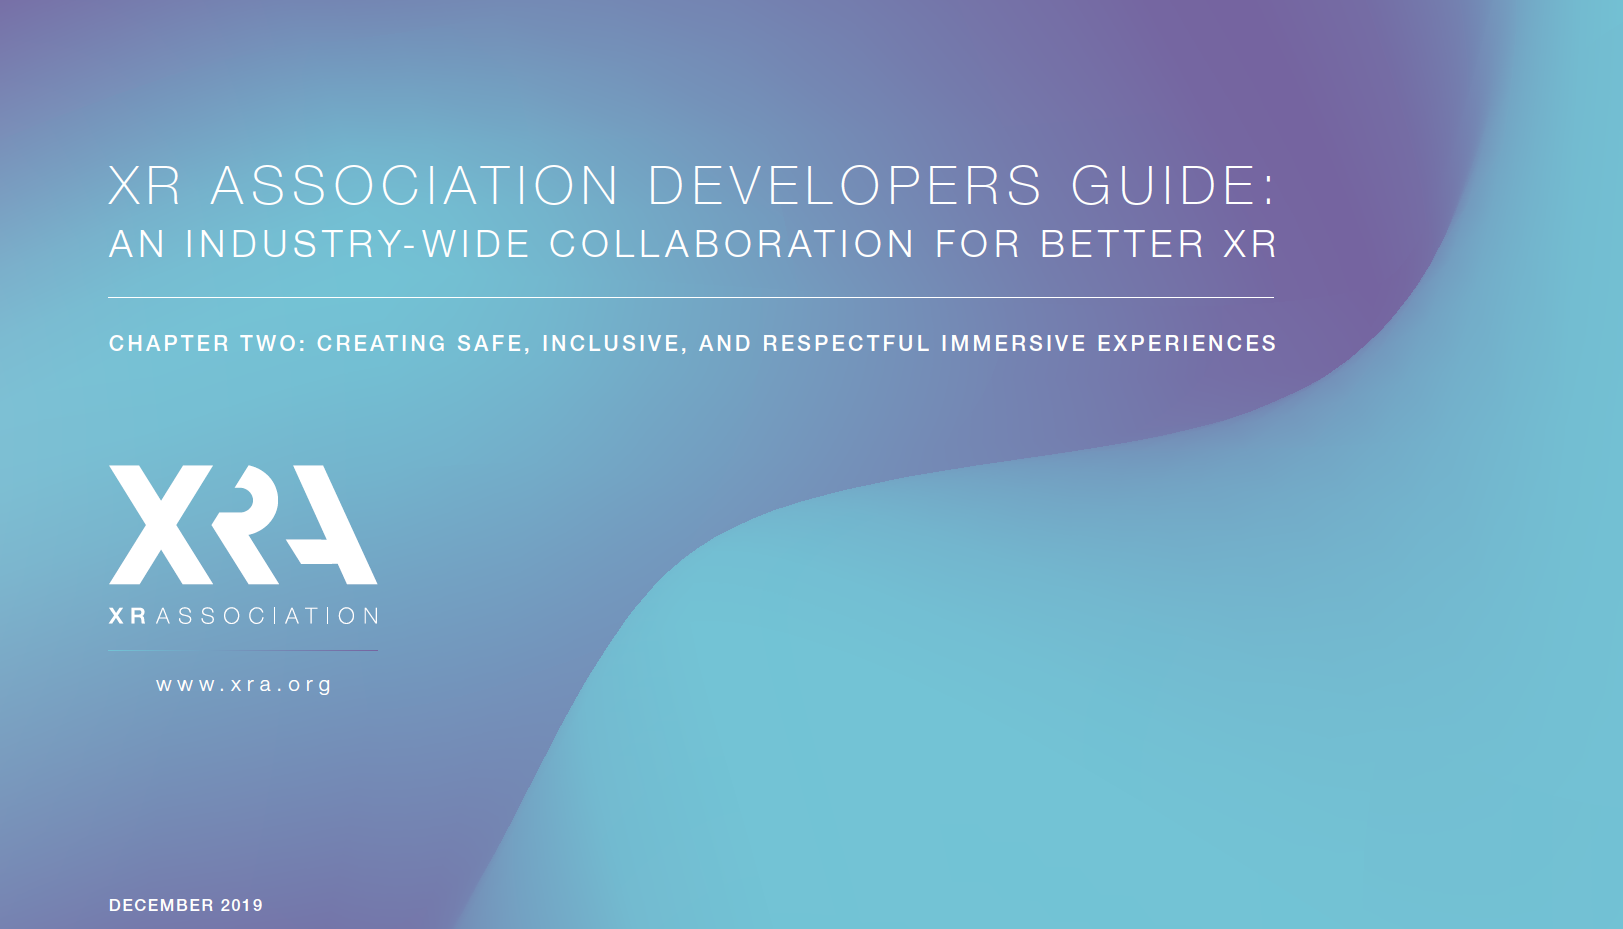 XR ASSOCIATION, VOICE OF XR MANUFACTURERS, RELEASES UPDATES TO DEVELOPERS GUIDE